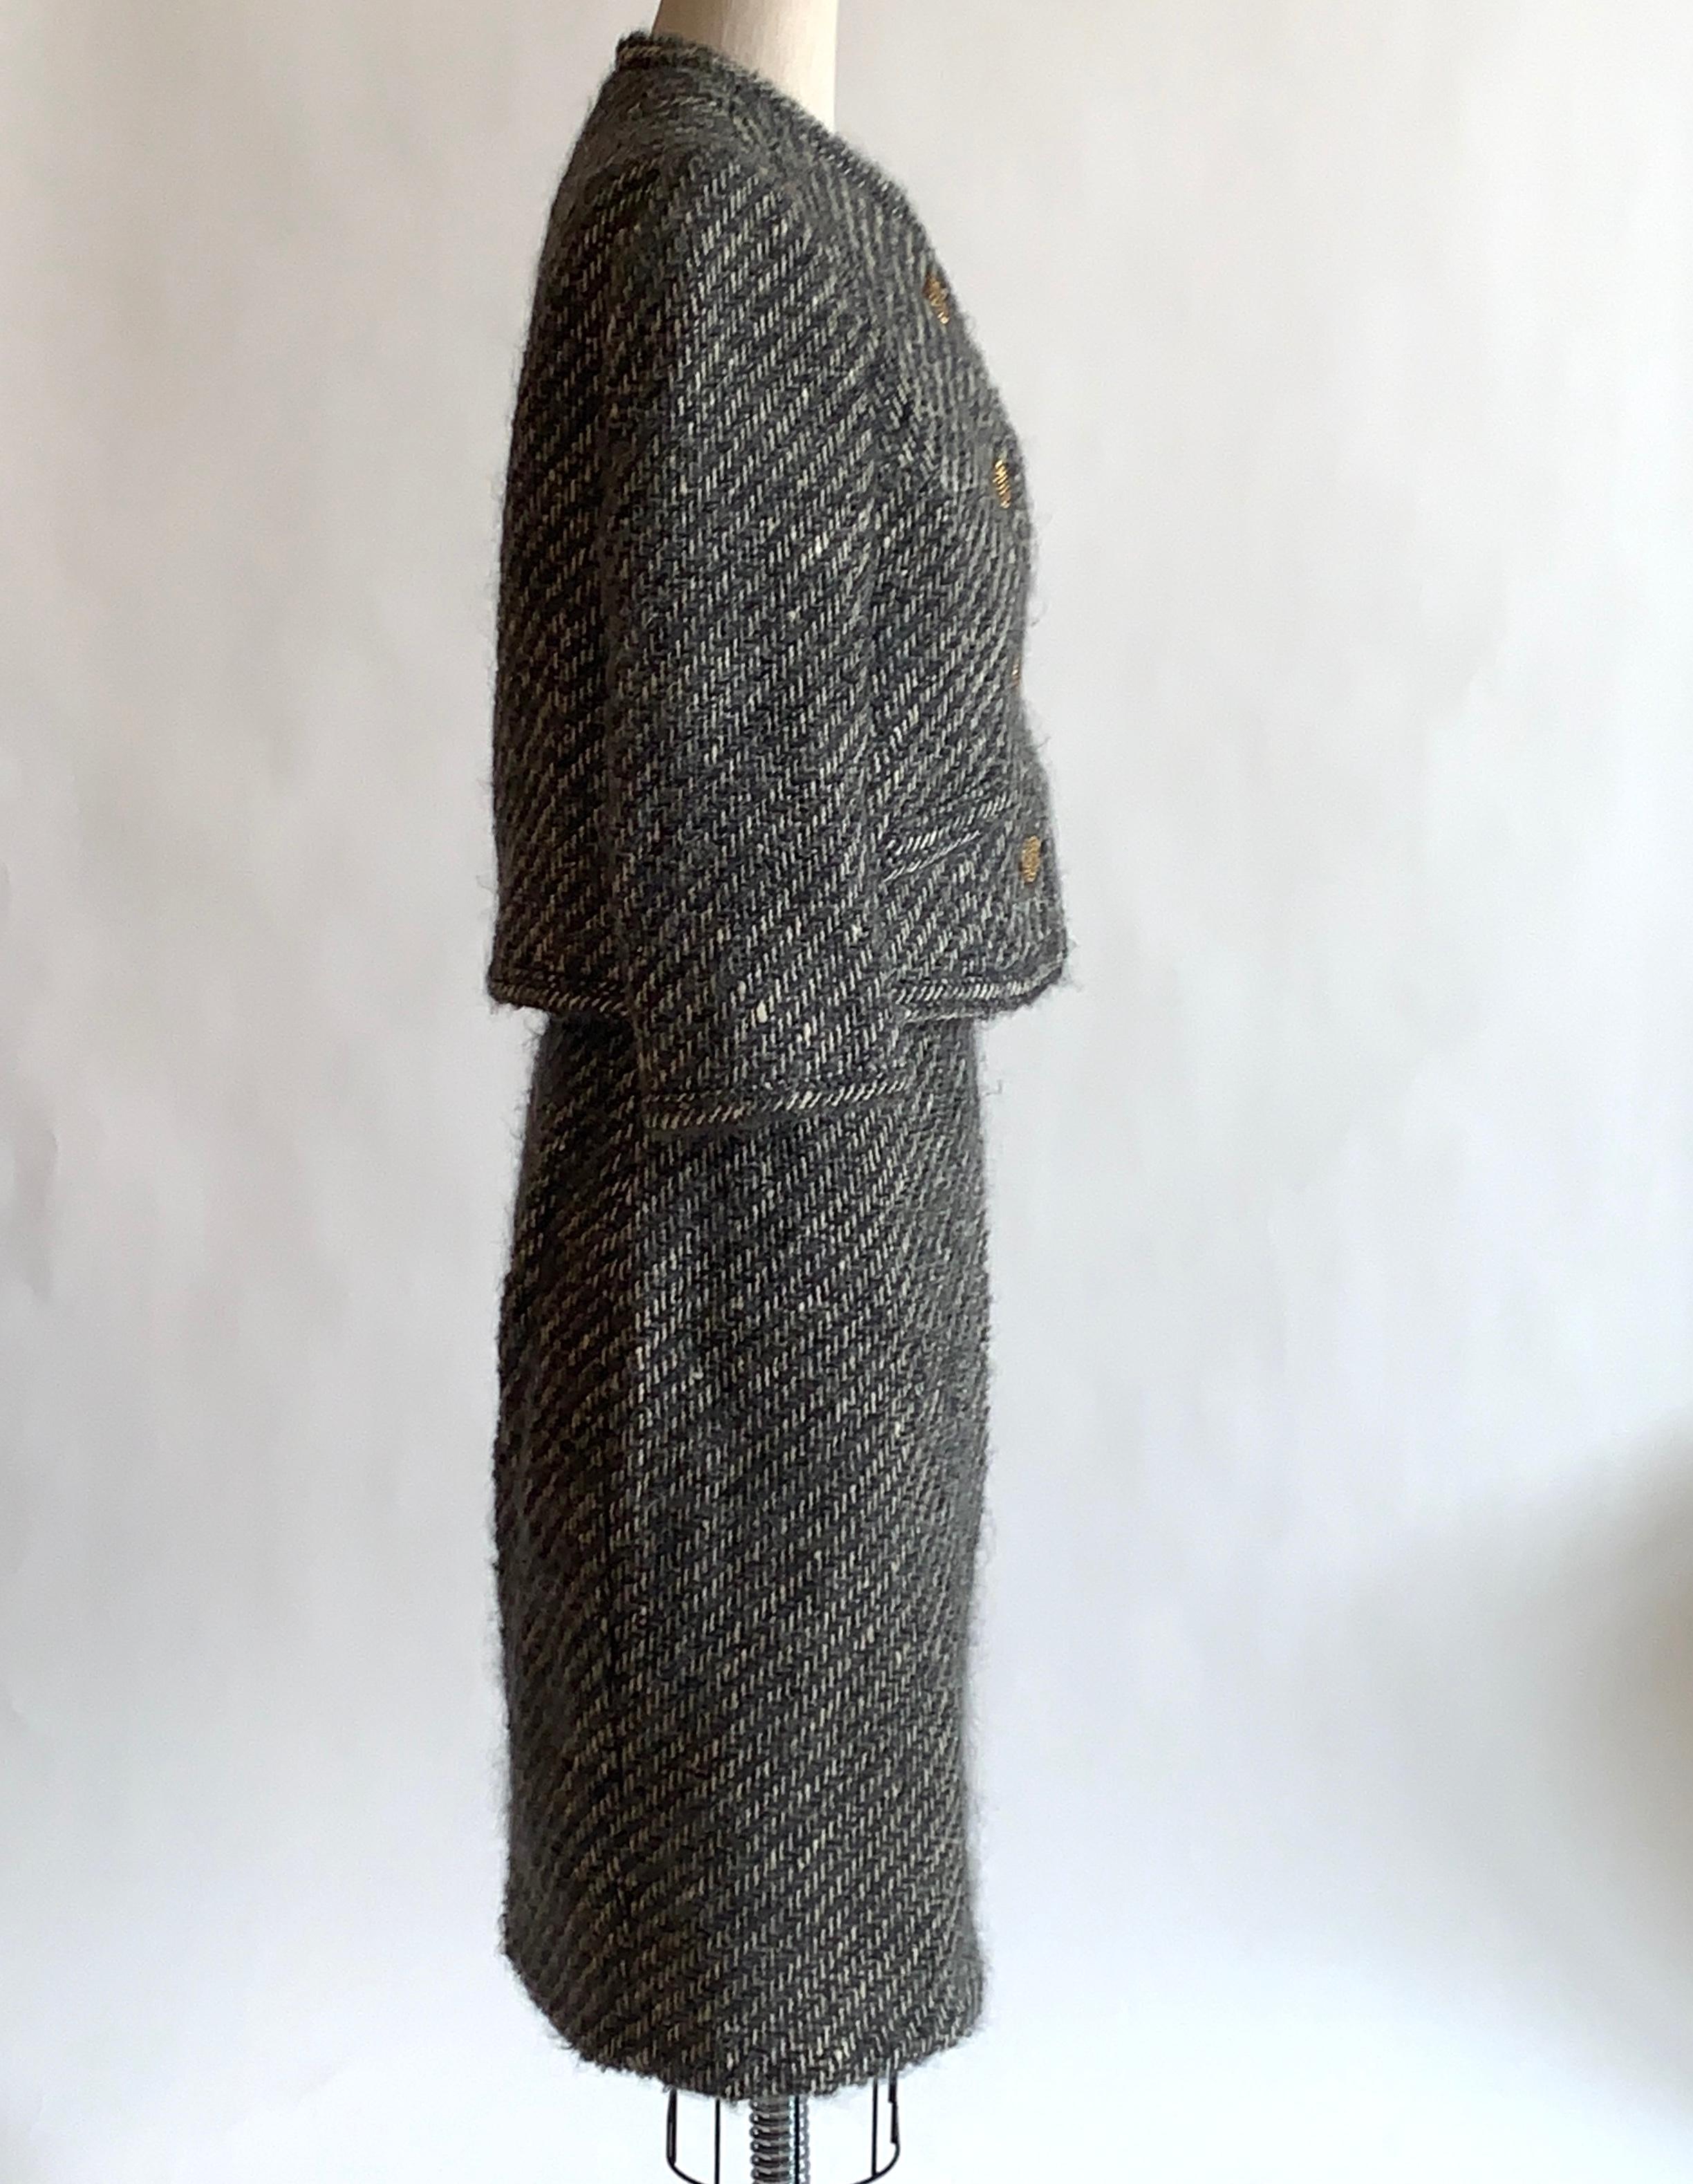 Gray Sophie of Saks Sophie Gimbel Grey 1960s Skirt Suit in Grey and White Fuzzy Weave For Sale